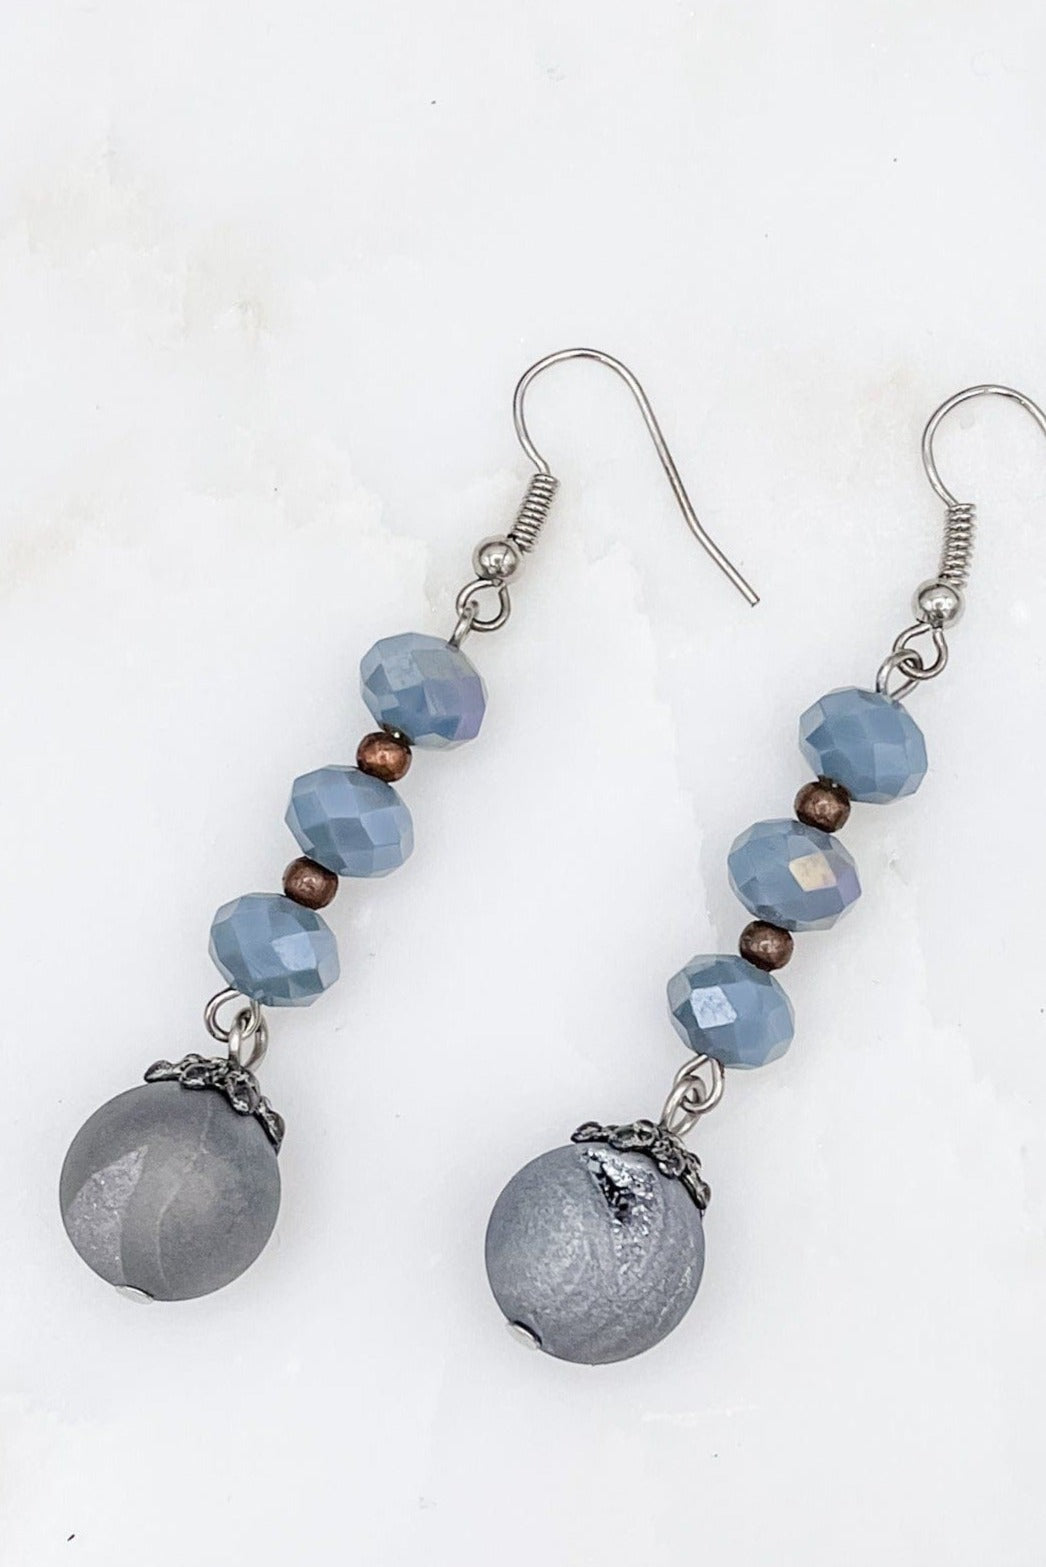 3 Bead Earring with Silver Druzy Stone